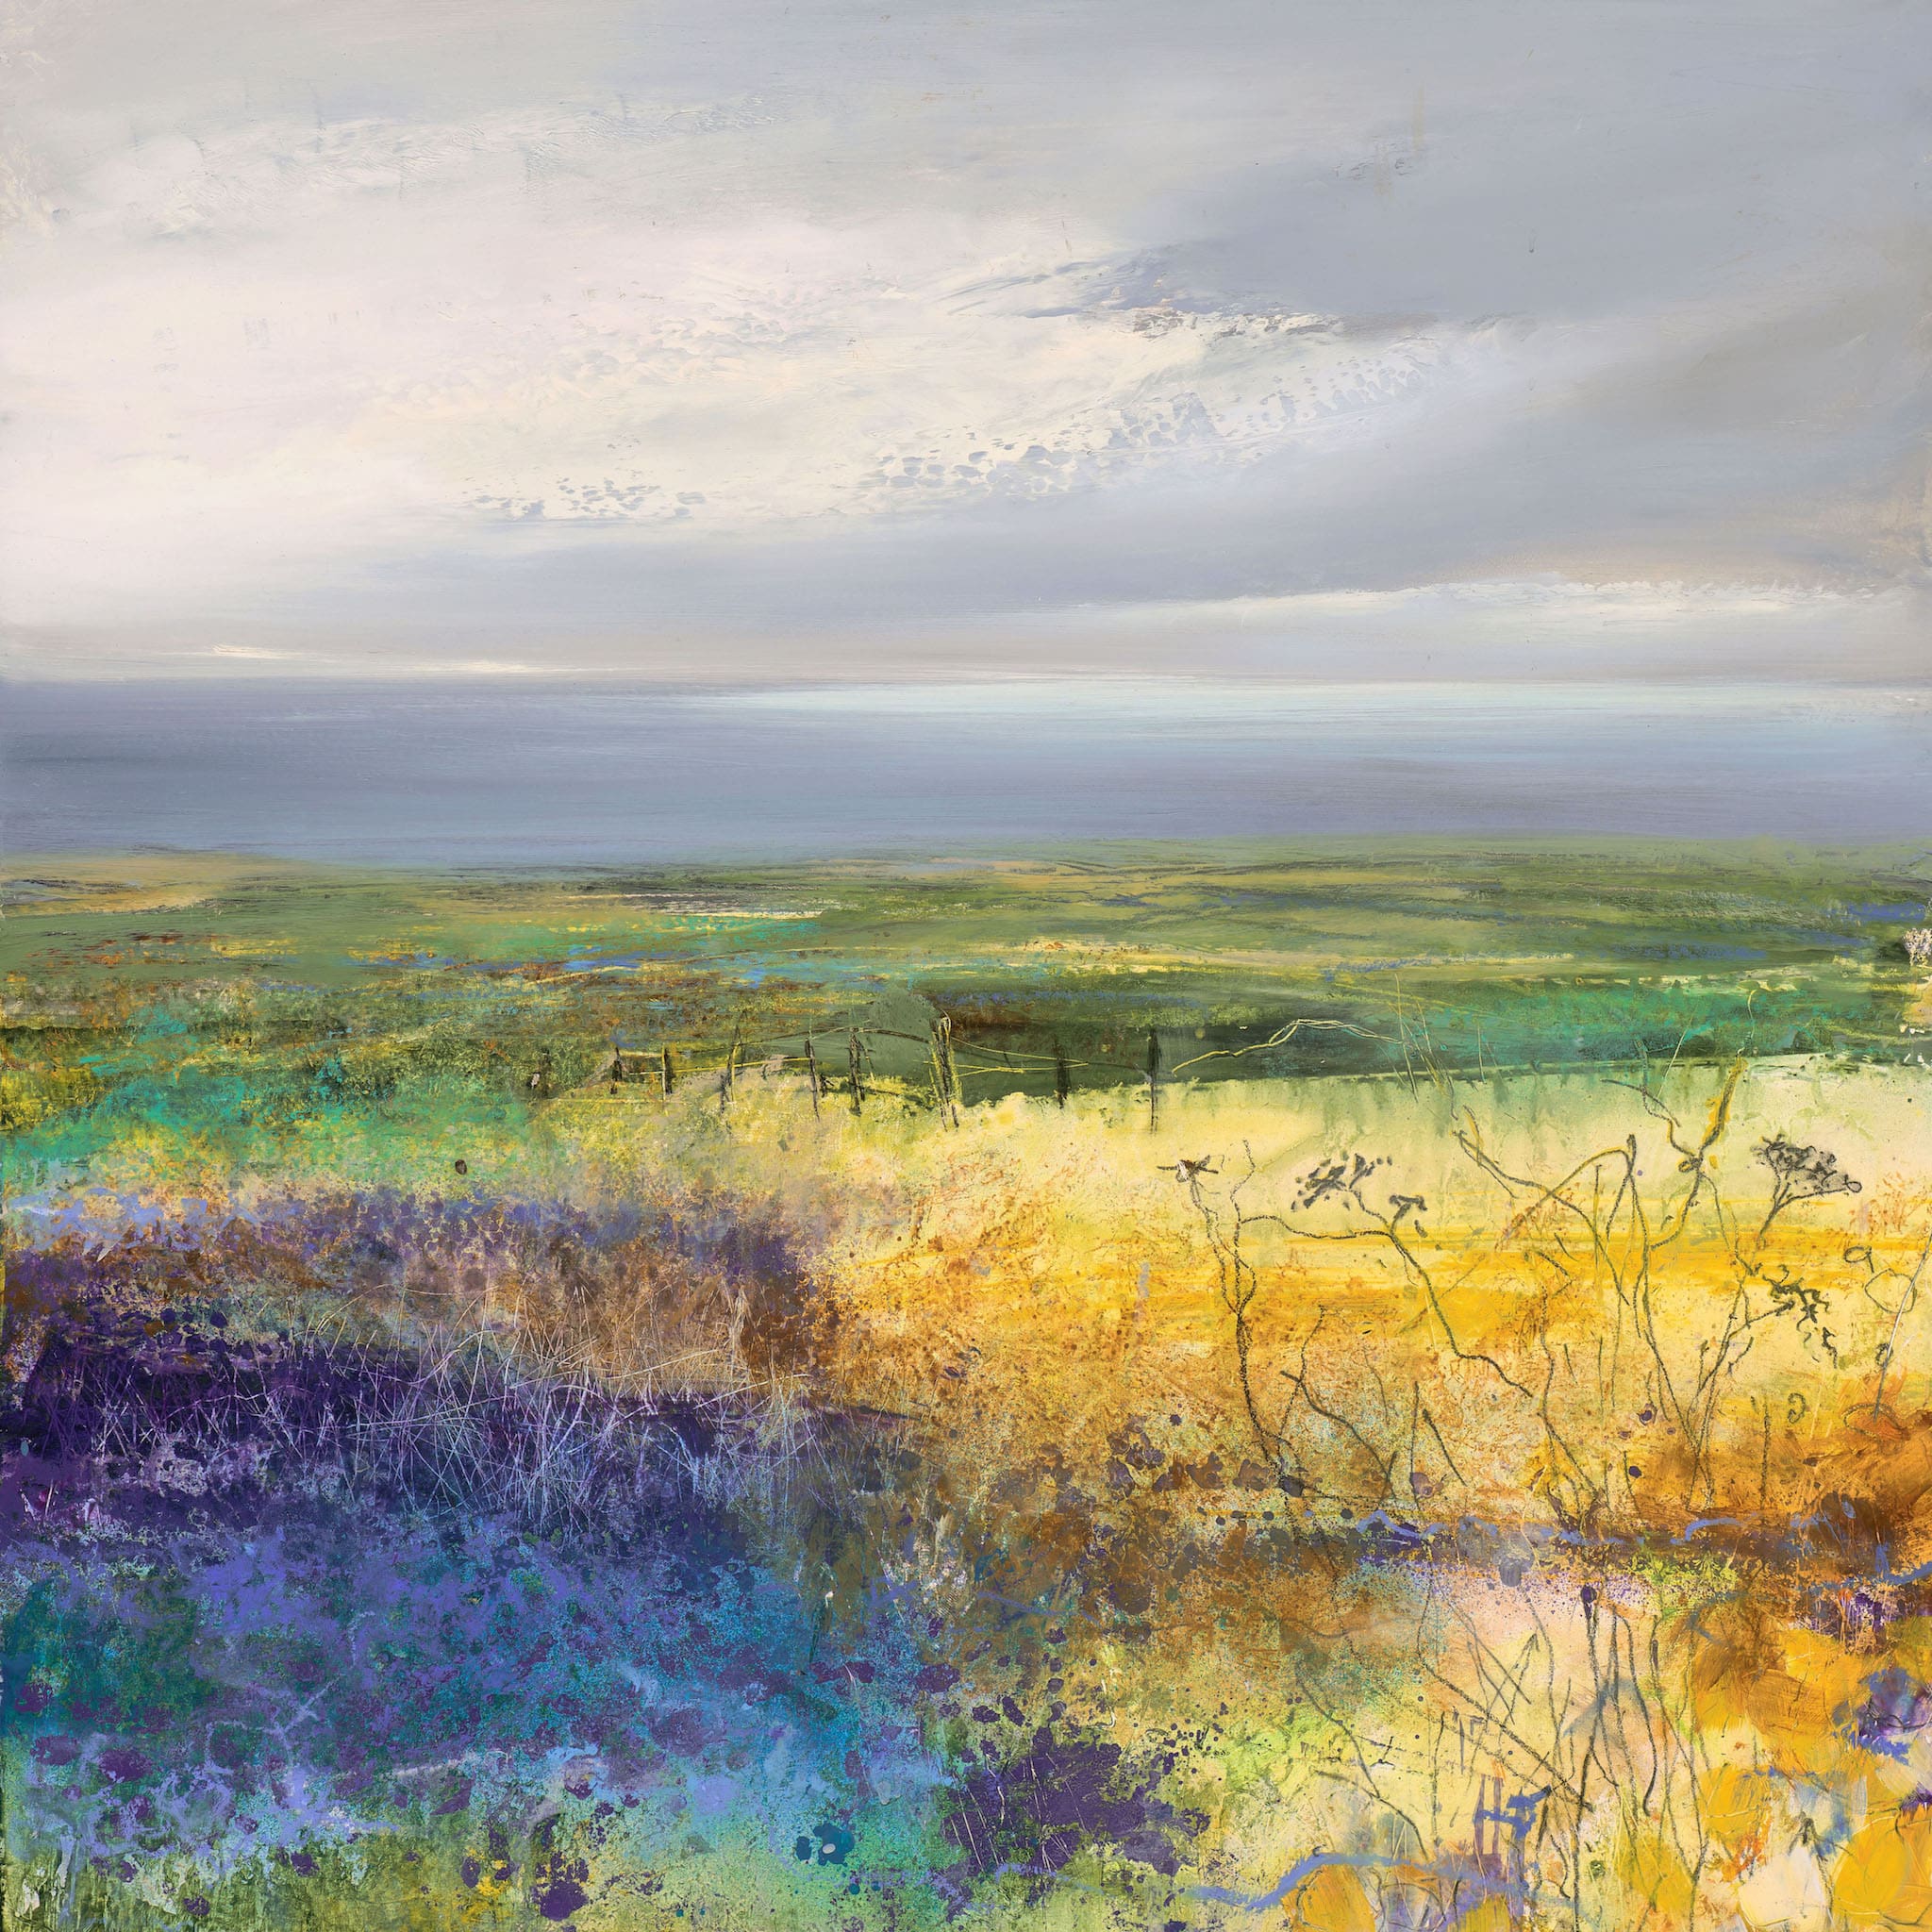 A painting of fields overlooking Mount's Bay, Cornwall by artist Amanda Hoskin